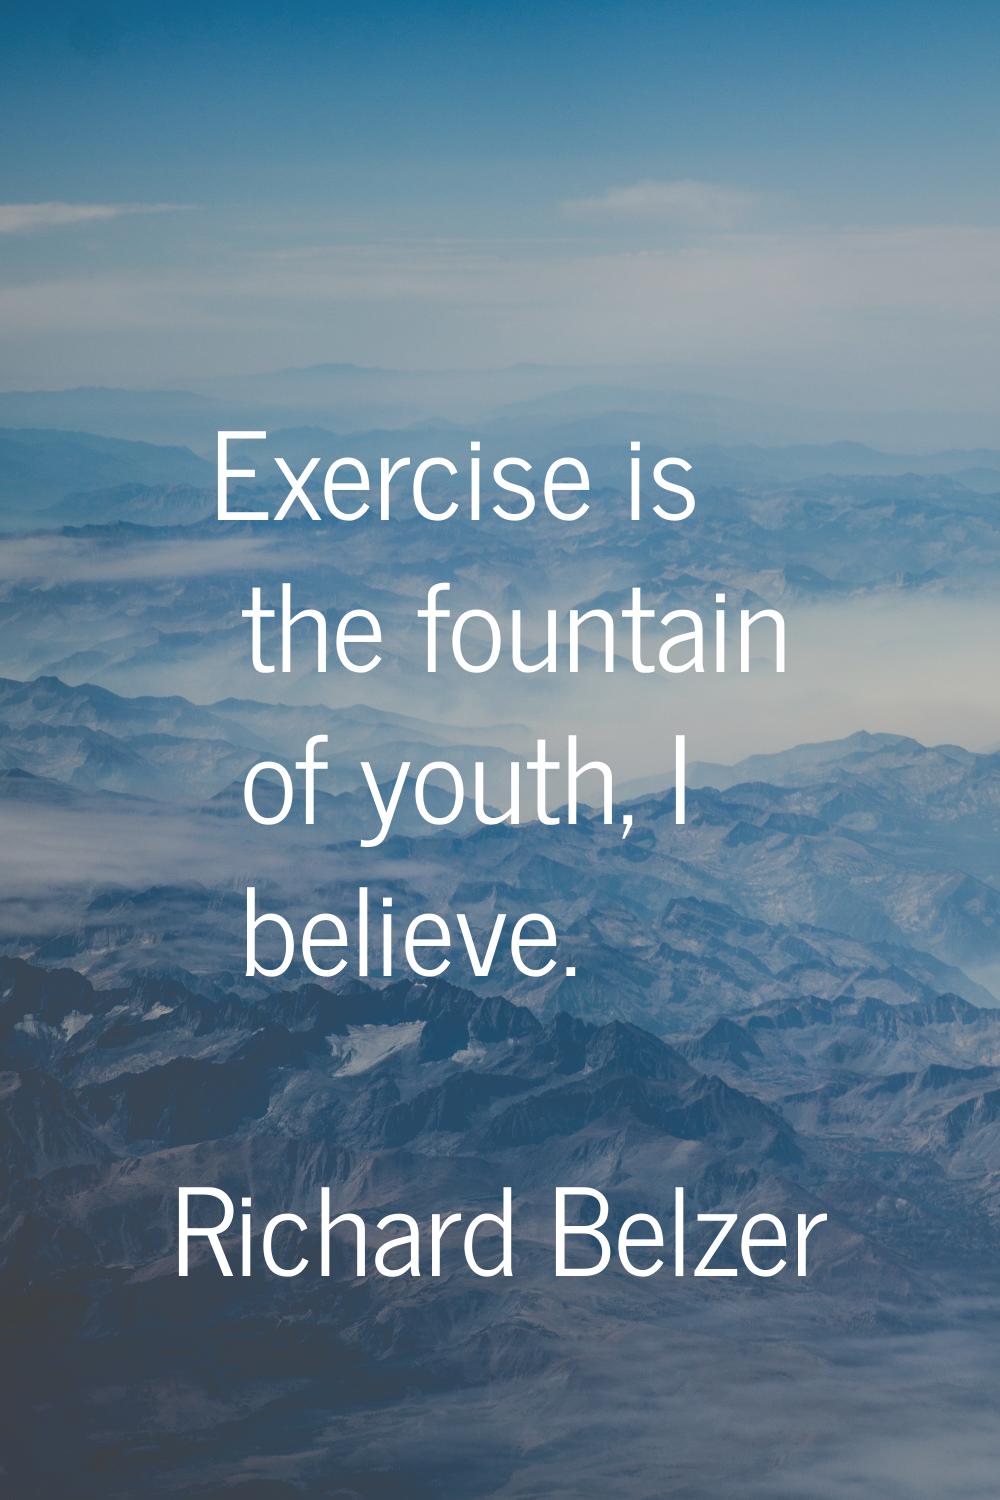 Exercise is the fountain of youth, I believe.